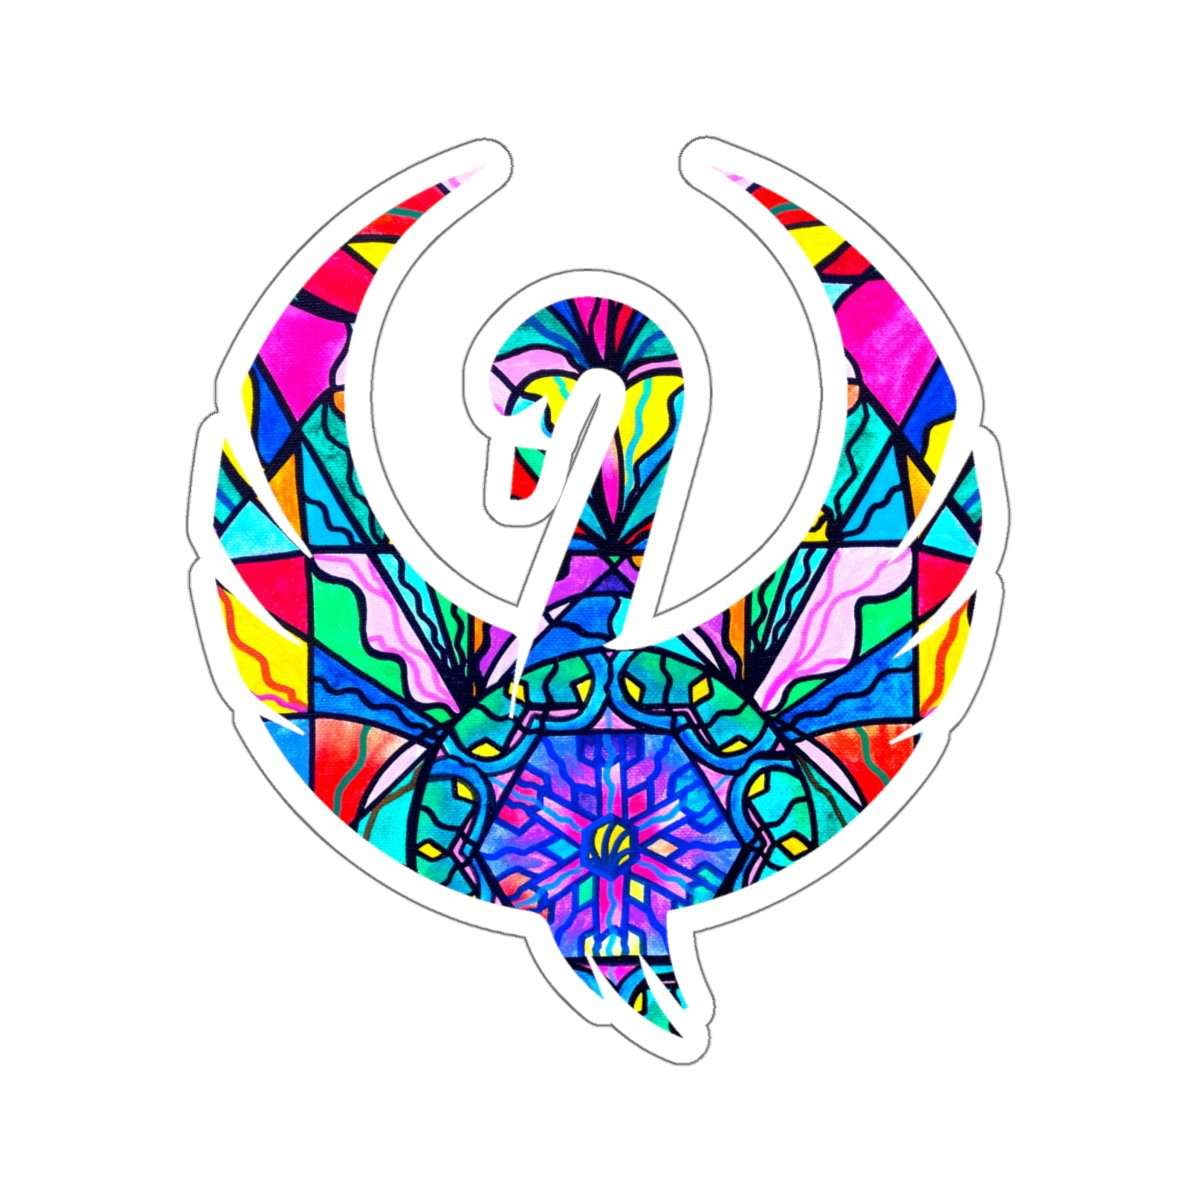 be-the-first-to-own-the-newest-anahata-heart-chakra-swan-stickers-supply_13.jpg